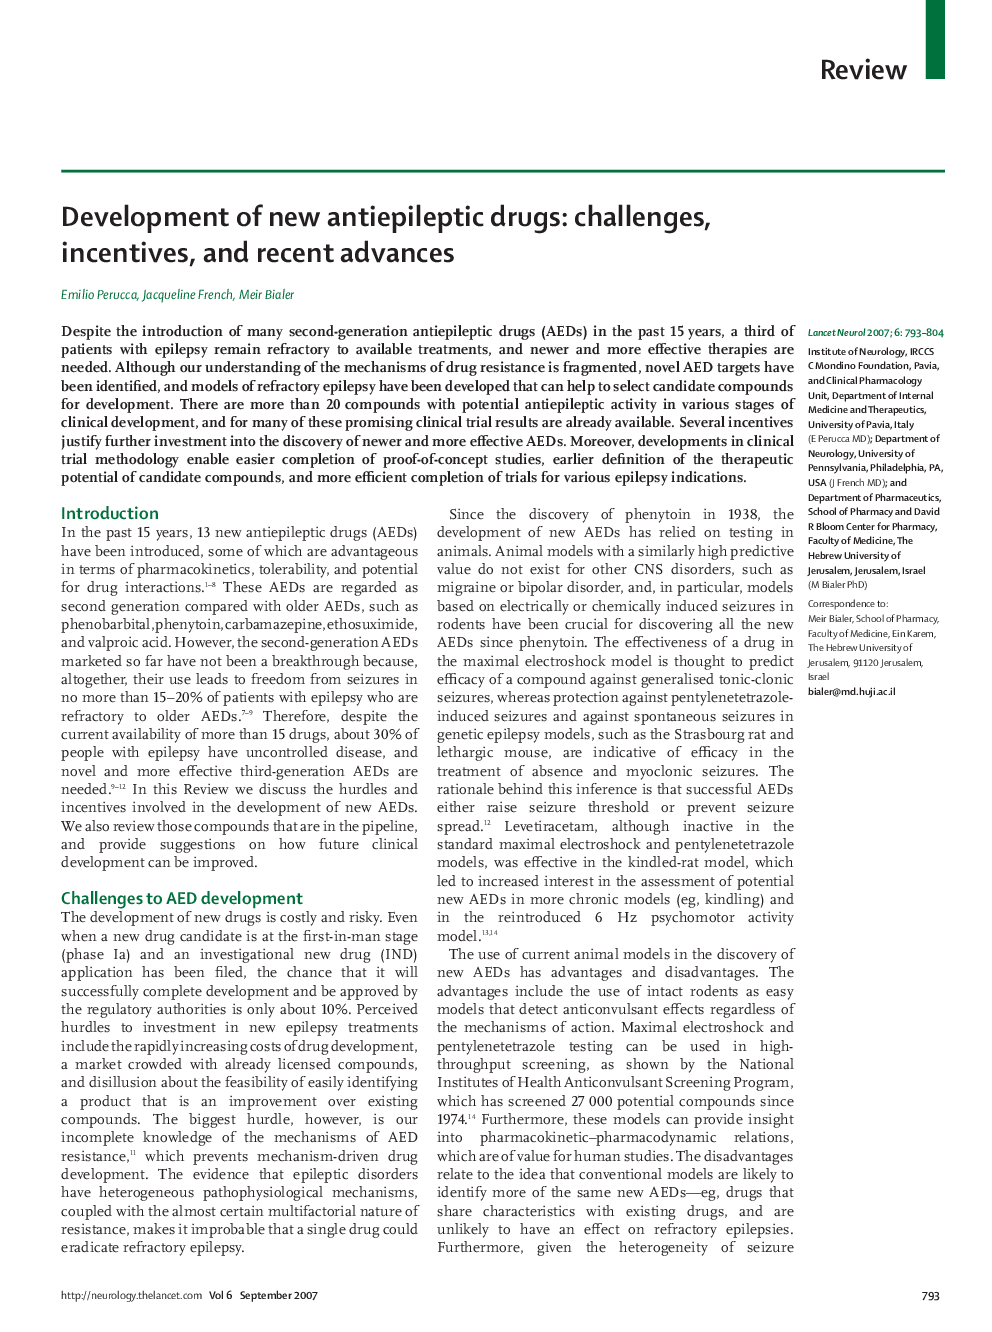 Development of new antiepileptic drugs: challenges, incentives, and recent advances